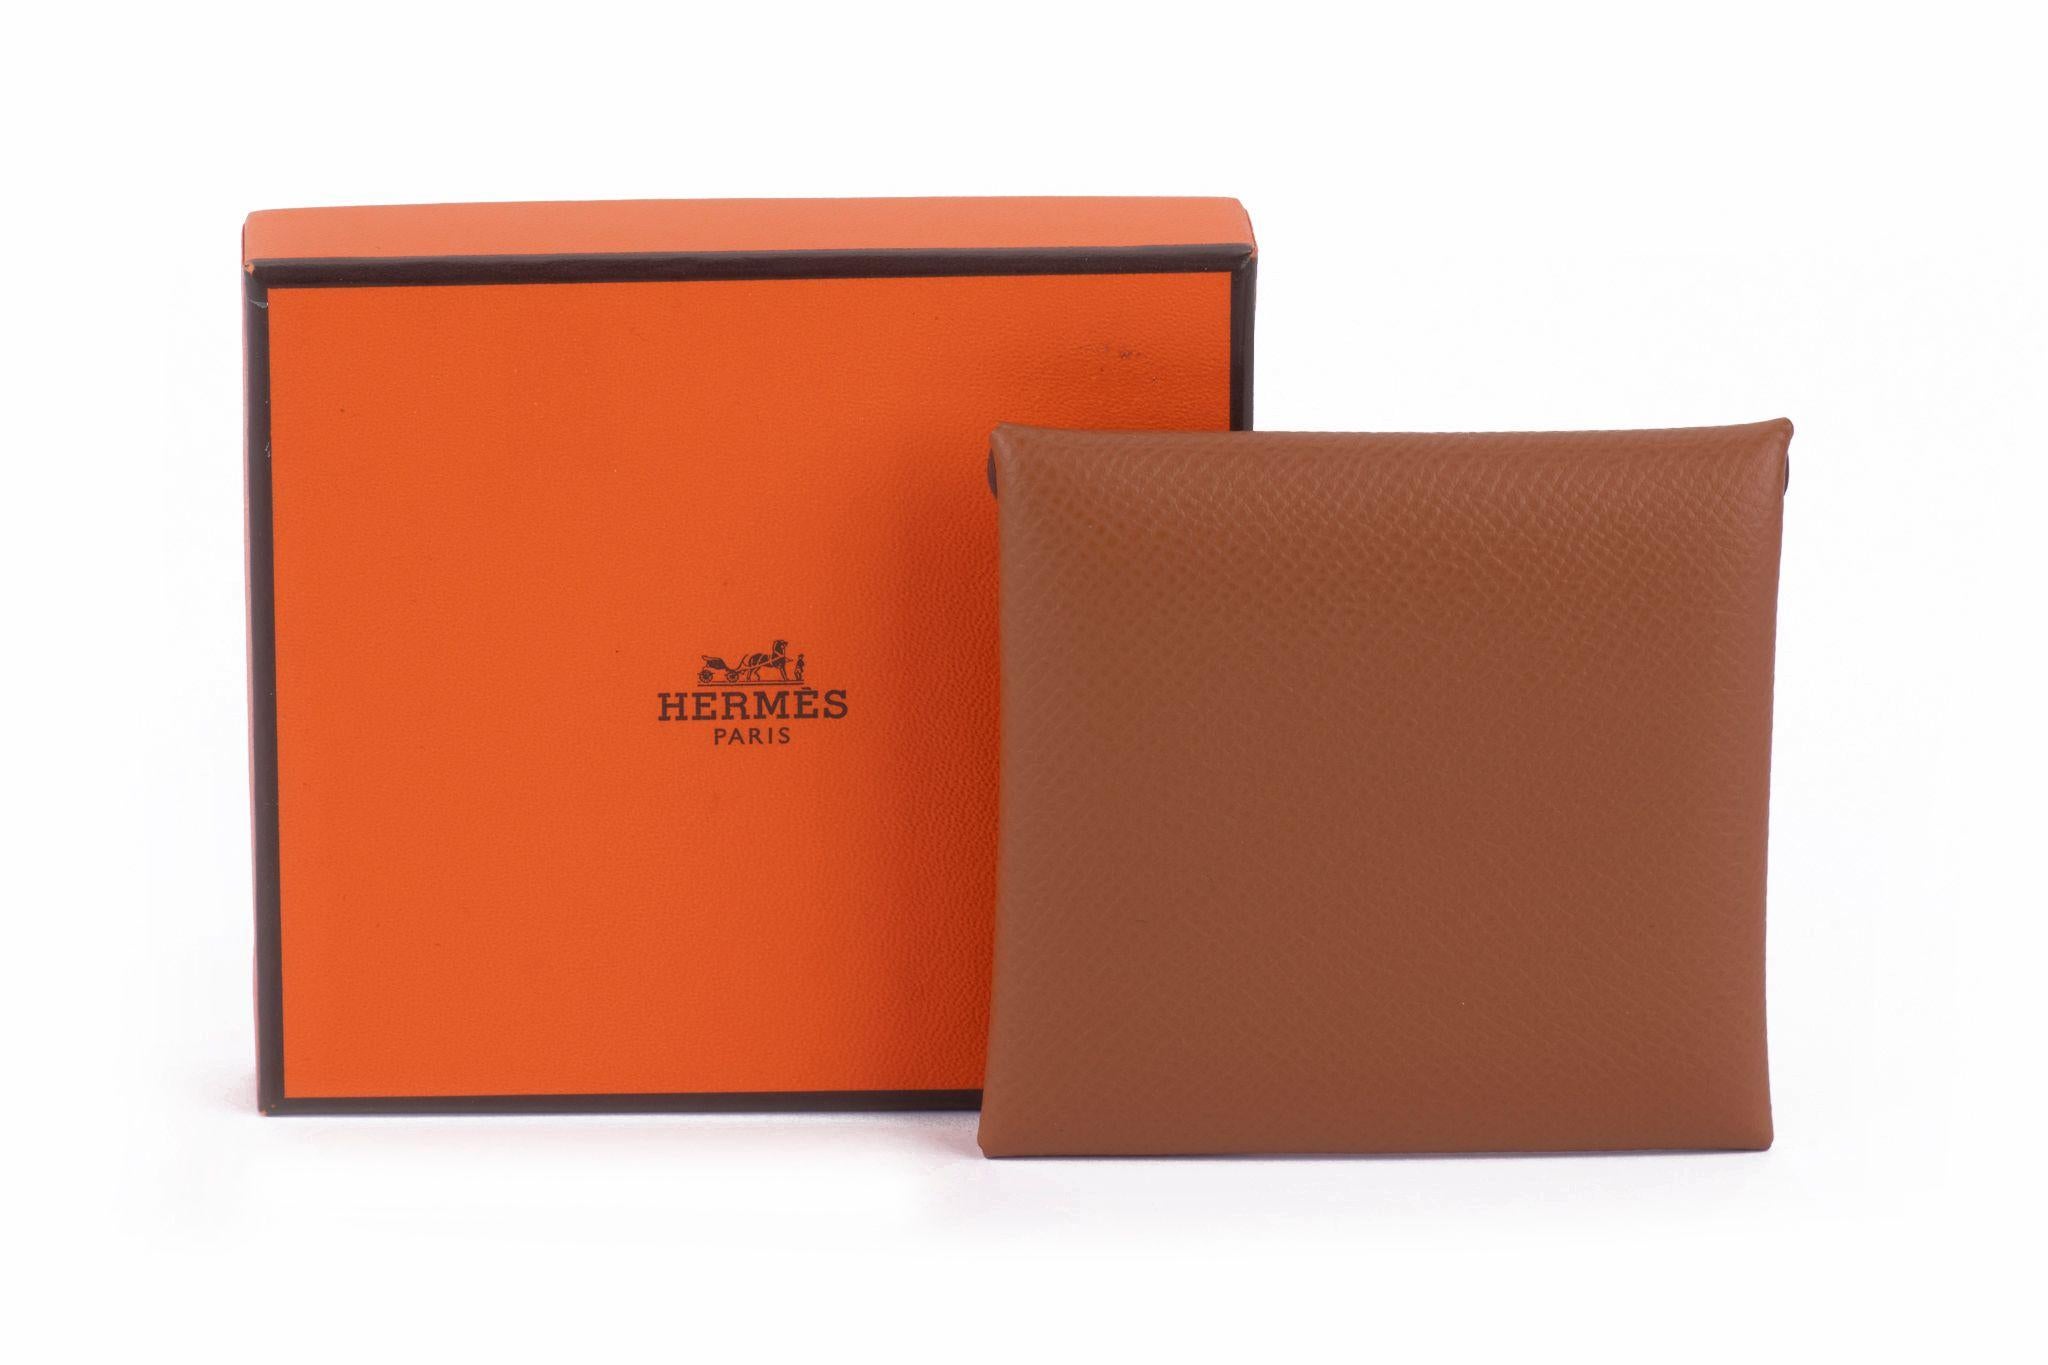 Hermès gold color epsom leather coin wallet. Palladium hardware. Brand new in box.